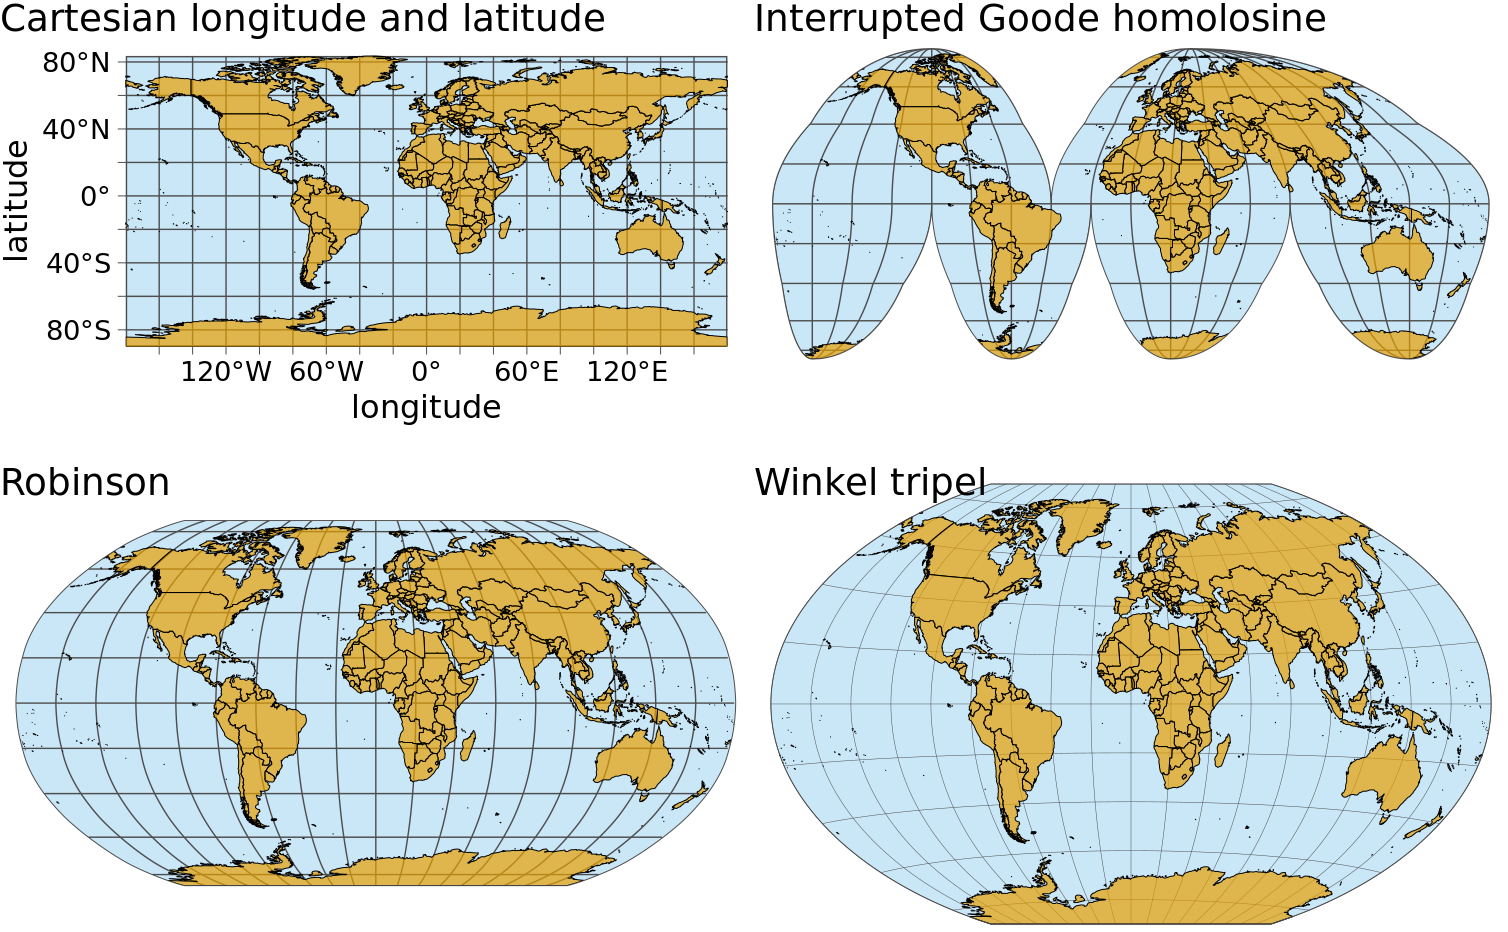 Map of the world, shown in four different projections. The Cartesian longitude and latitude system maps the longitude and latitude of each location onto a regular Cartesian coordinate system. This mapping causes substantial distortions in both areas and angles relative to their true values on the 3D globe. The interrupted Goode homolosine projection perfectly represents true surface areas, at the cost of dividing some land masses into separate pieces, most notably Greenland and Antarctica. The Robinson projection and the Winkel tripel projection both strike a balance between angular and area distortions, and they are commonly used for maps of the entire globe.